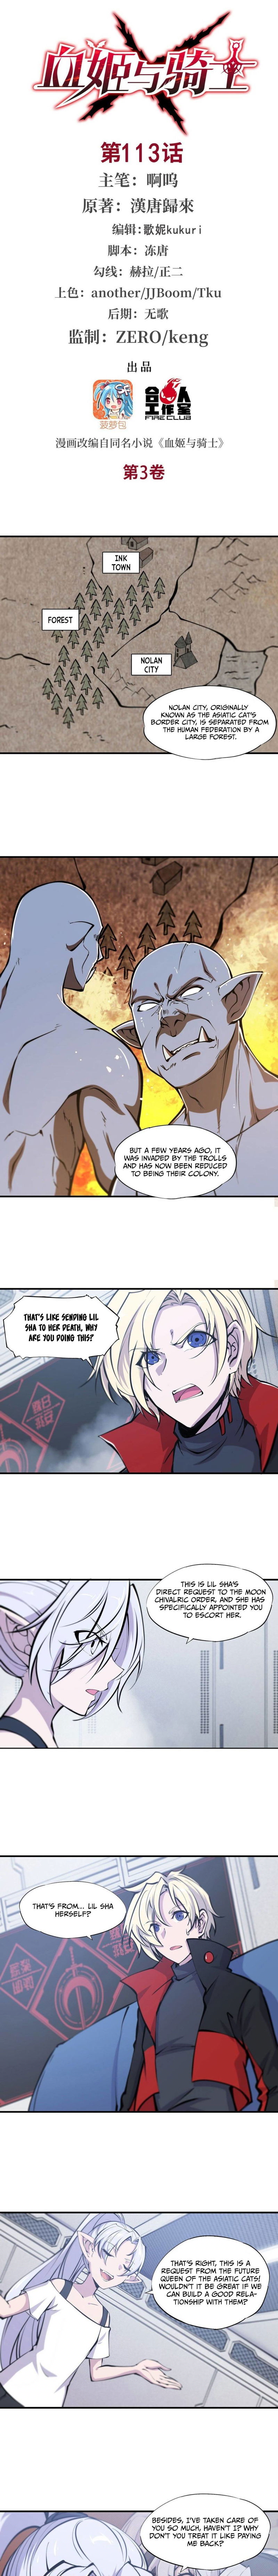 The Blood Princess and the Knight Chapter 113 page 2